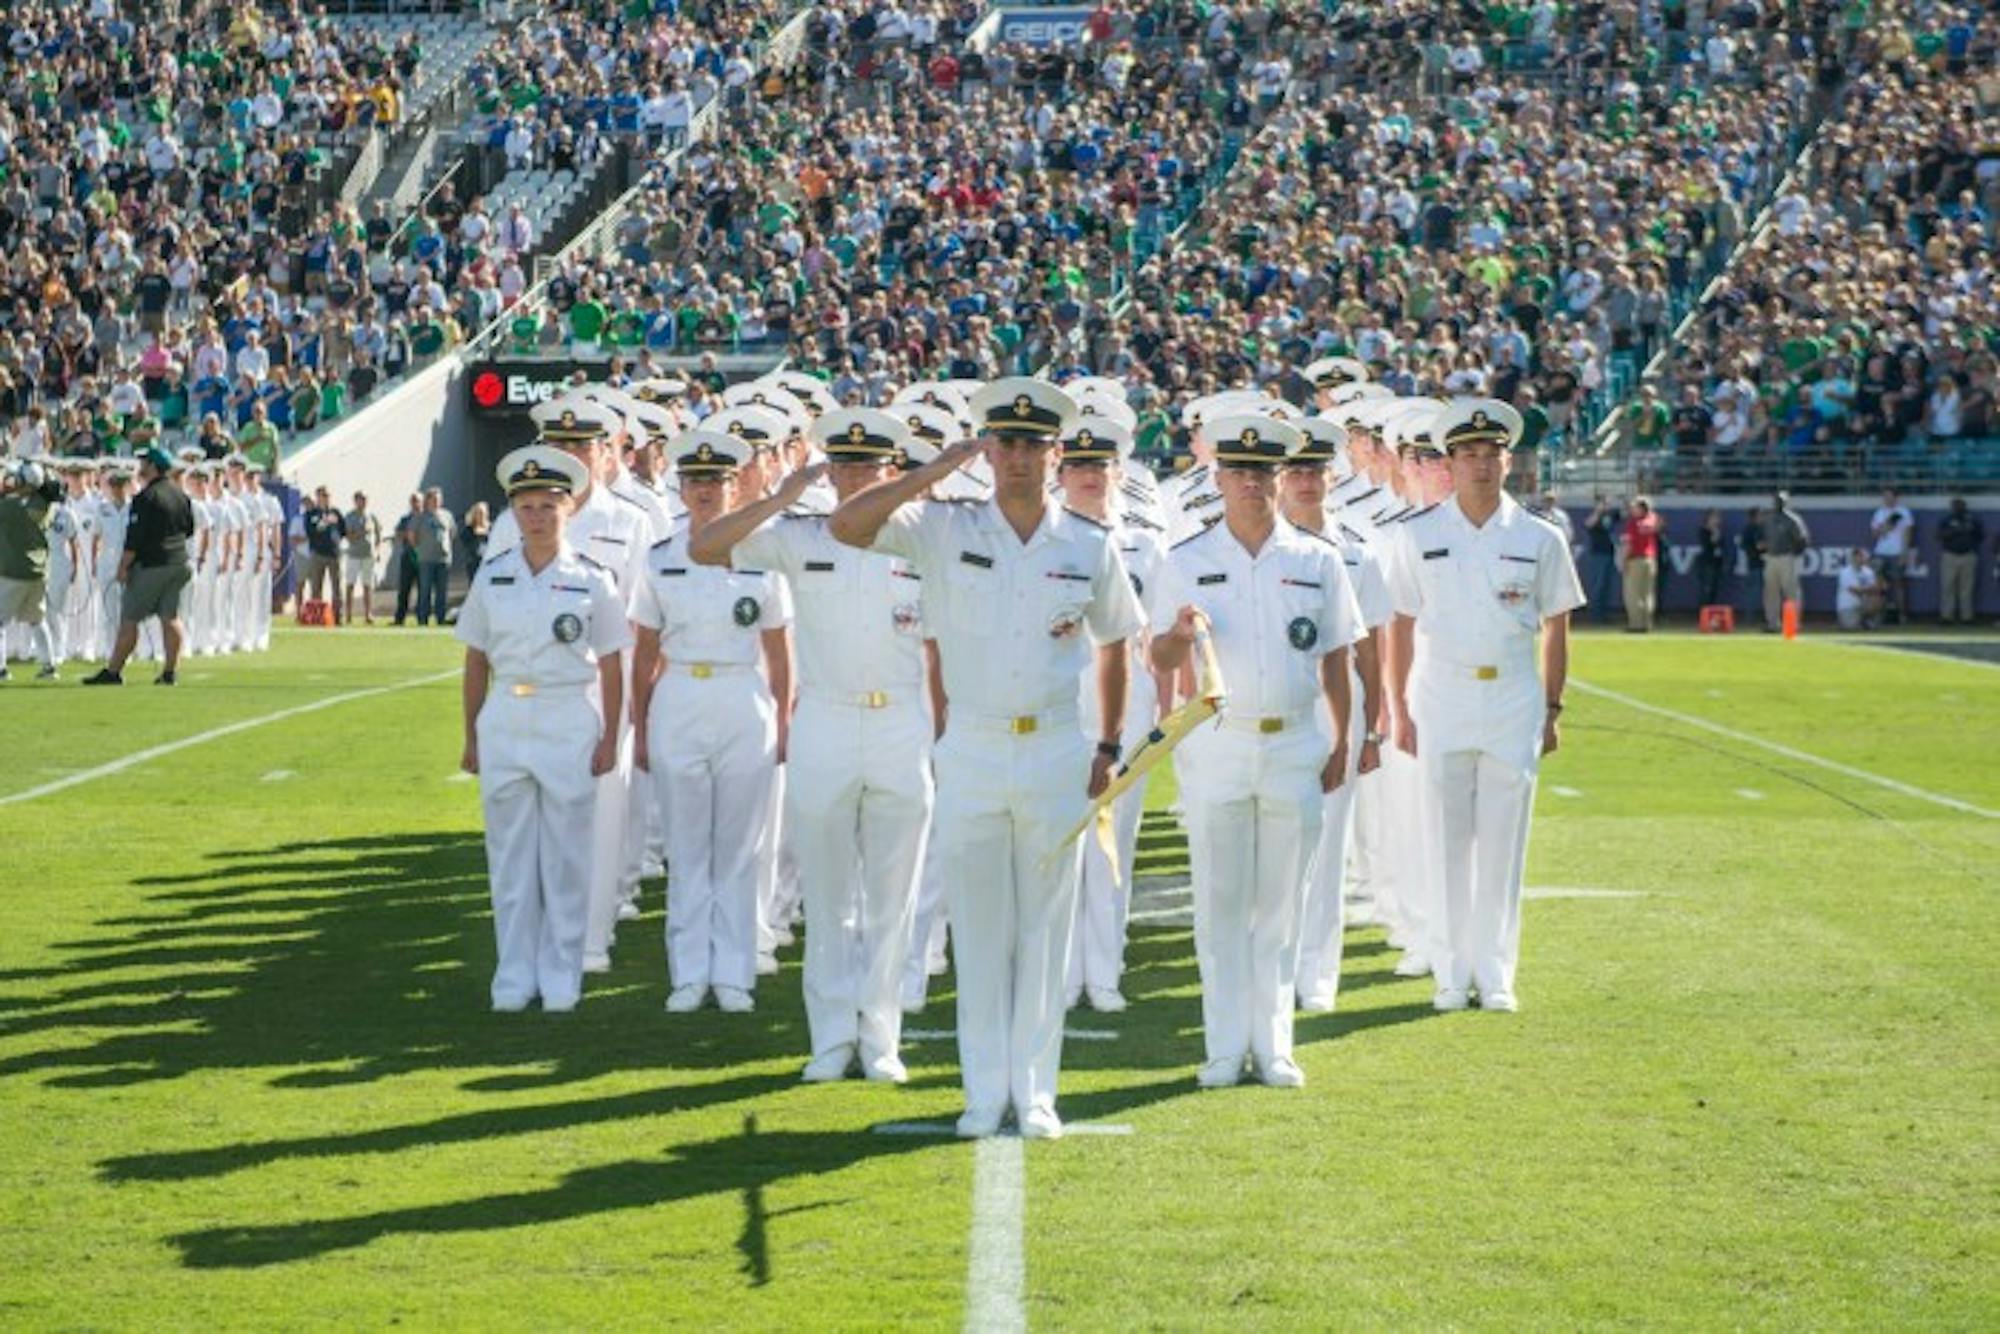 Midshipmen of Hotel Company participate in the opening procession of student attendees to the game.